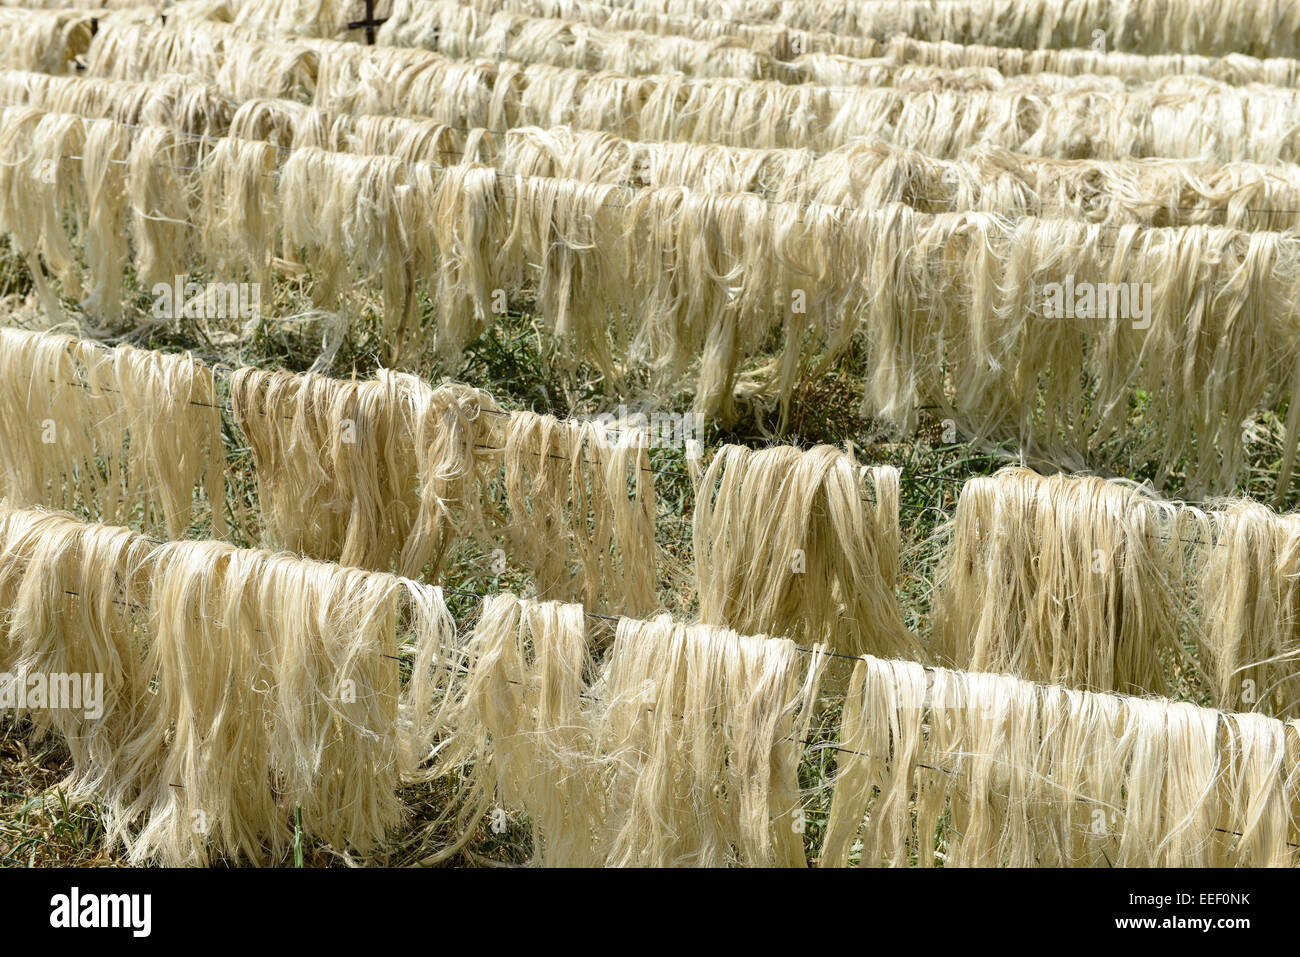 TANZANIA, Tanga, Korogwe, Sisal plantation, after harvest and processing  the fibre of sisal leaves are dried in the sun Stock Photo